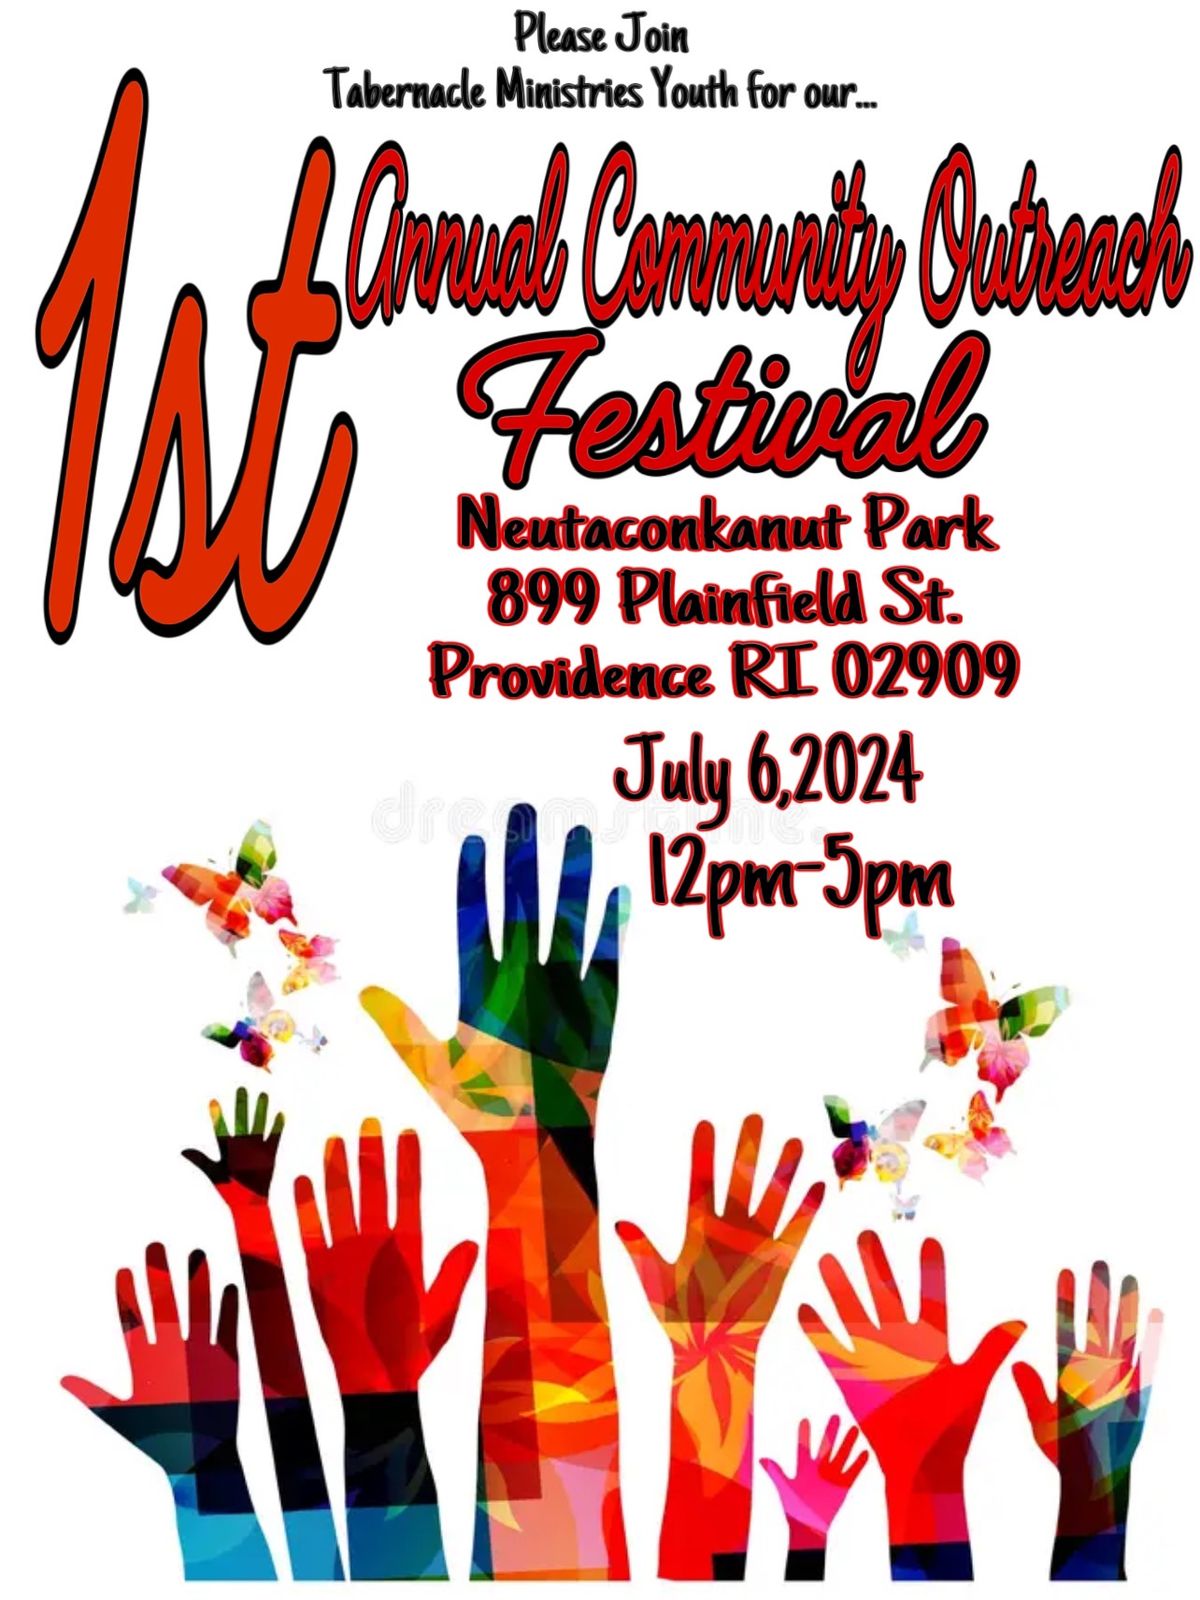 Tabernacle Ministries Youth 1st Annual Community Festival 